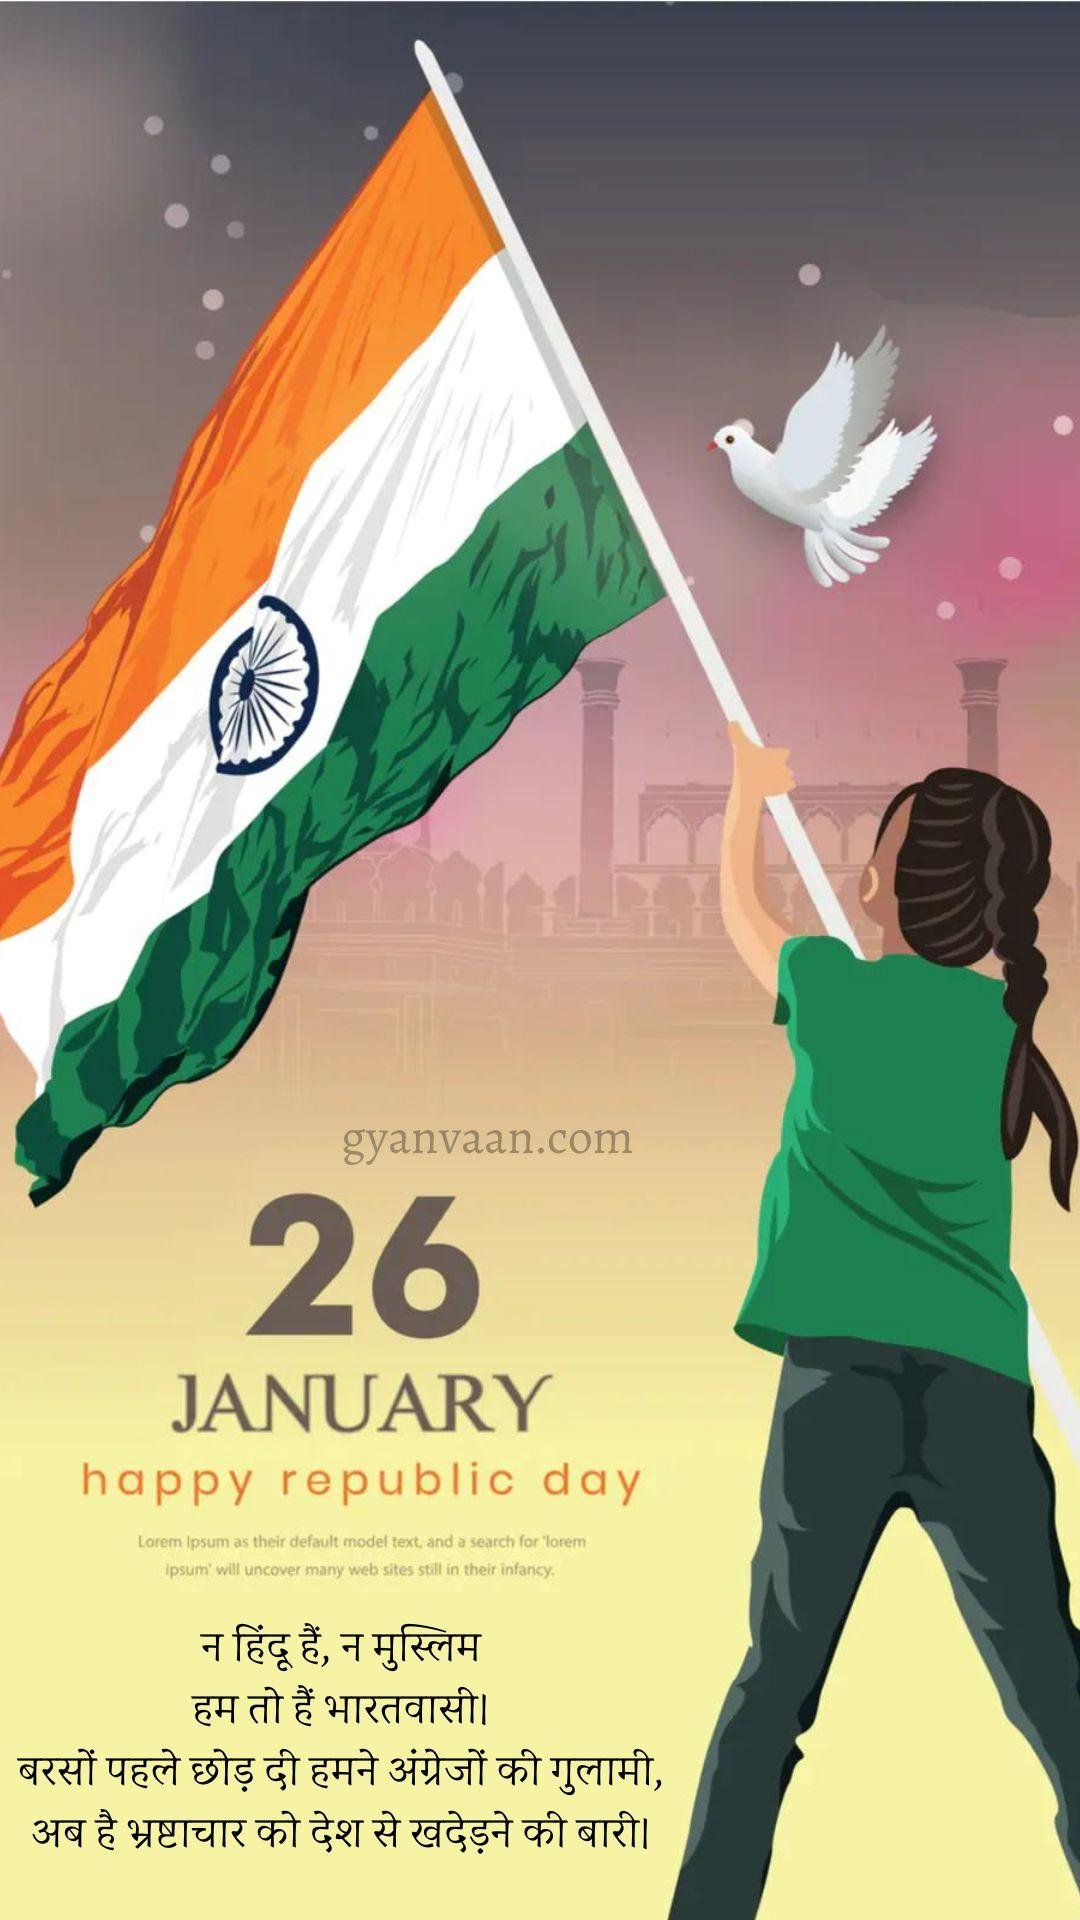 Republic Day Quotes In Hindi With Status And Shayari 15 - Republic Day Quotes In Hindi